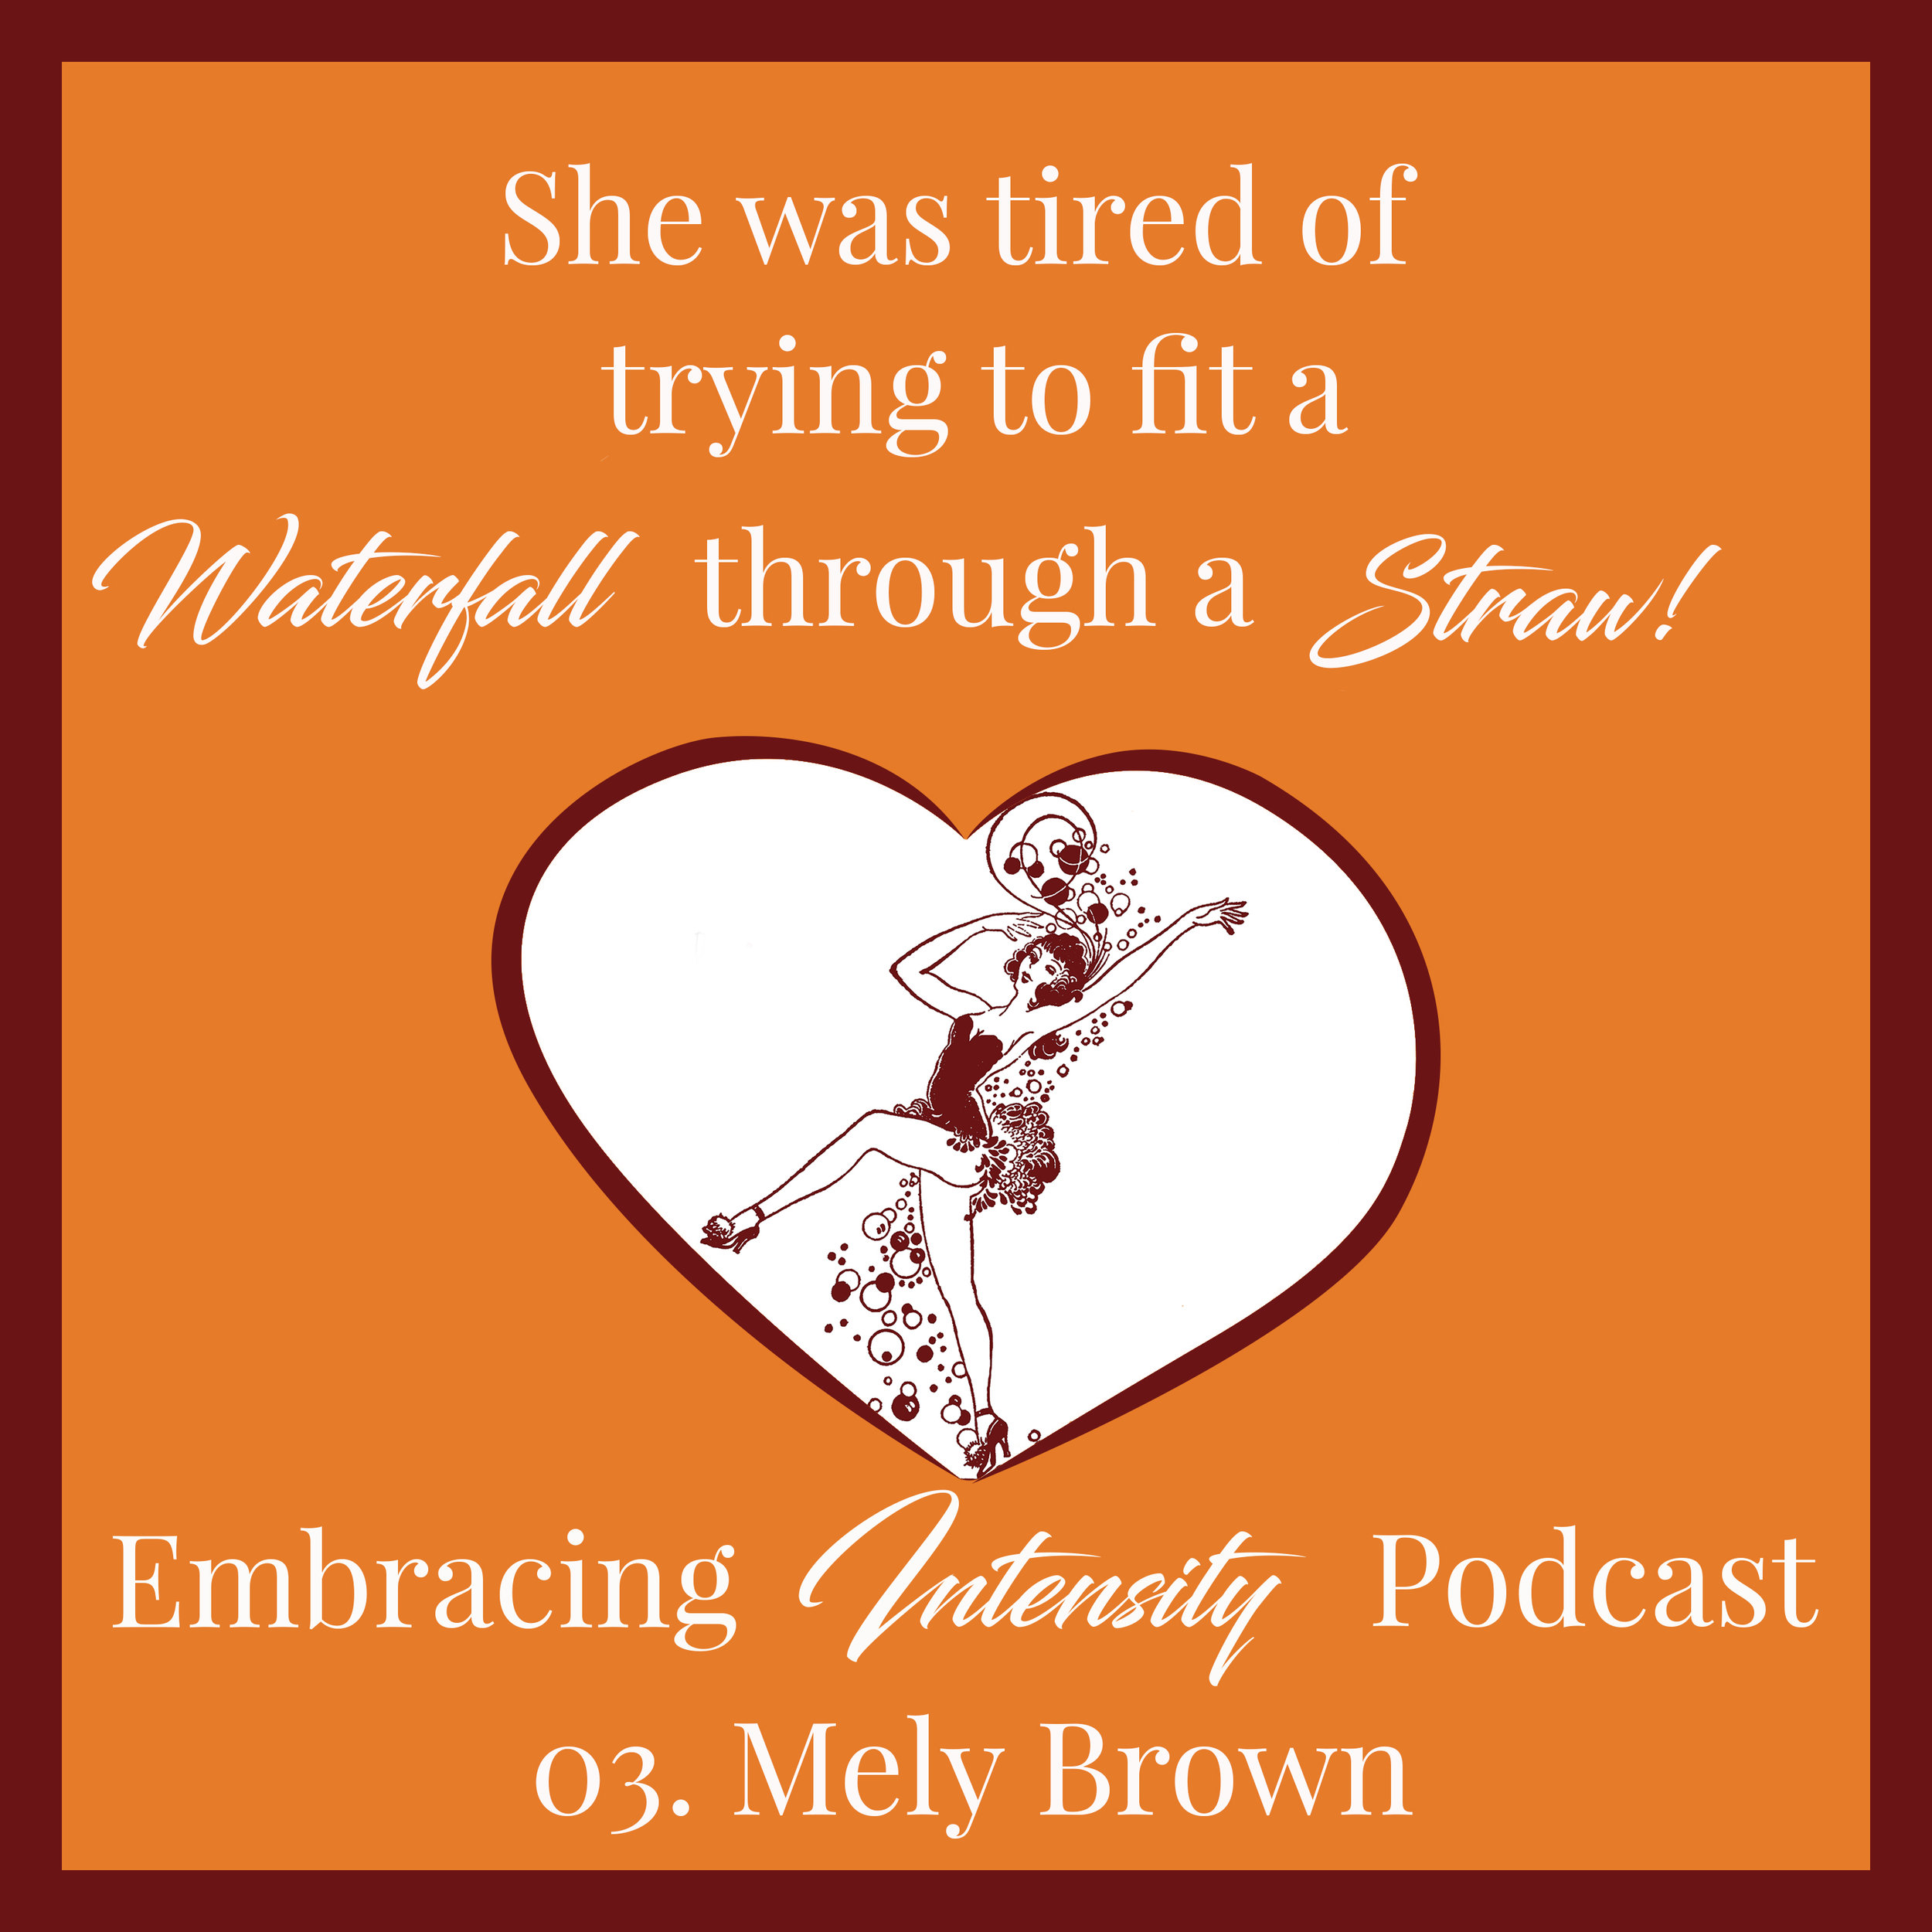 She was tired of trying to fit a waterfall through a straw. Embracing Intensity Podcast ep. 03: Self-Care for the Highly Sensitive Woman with Mely Brown